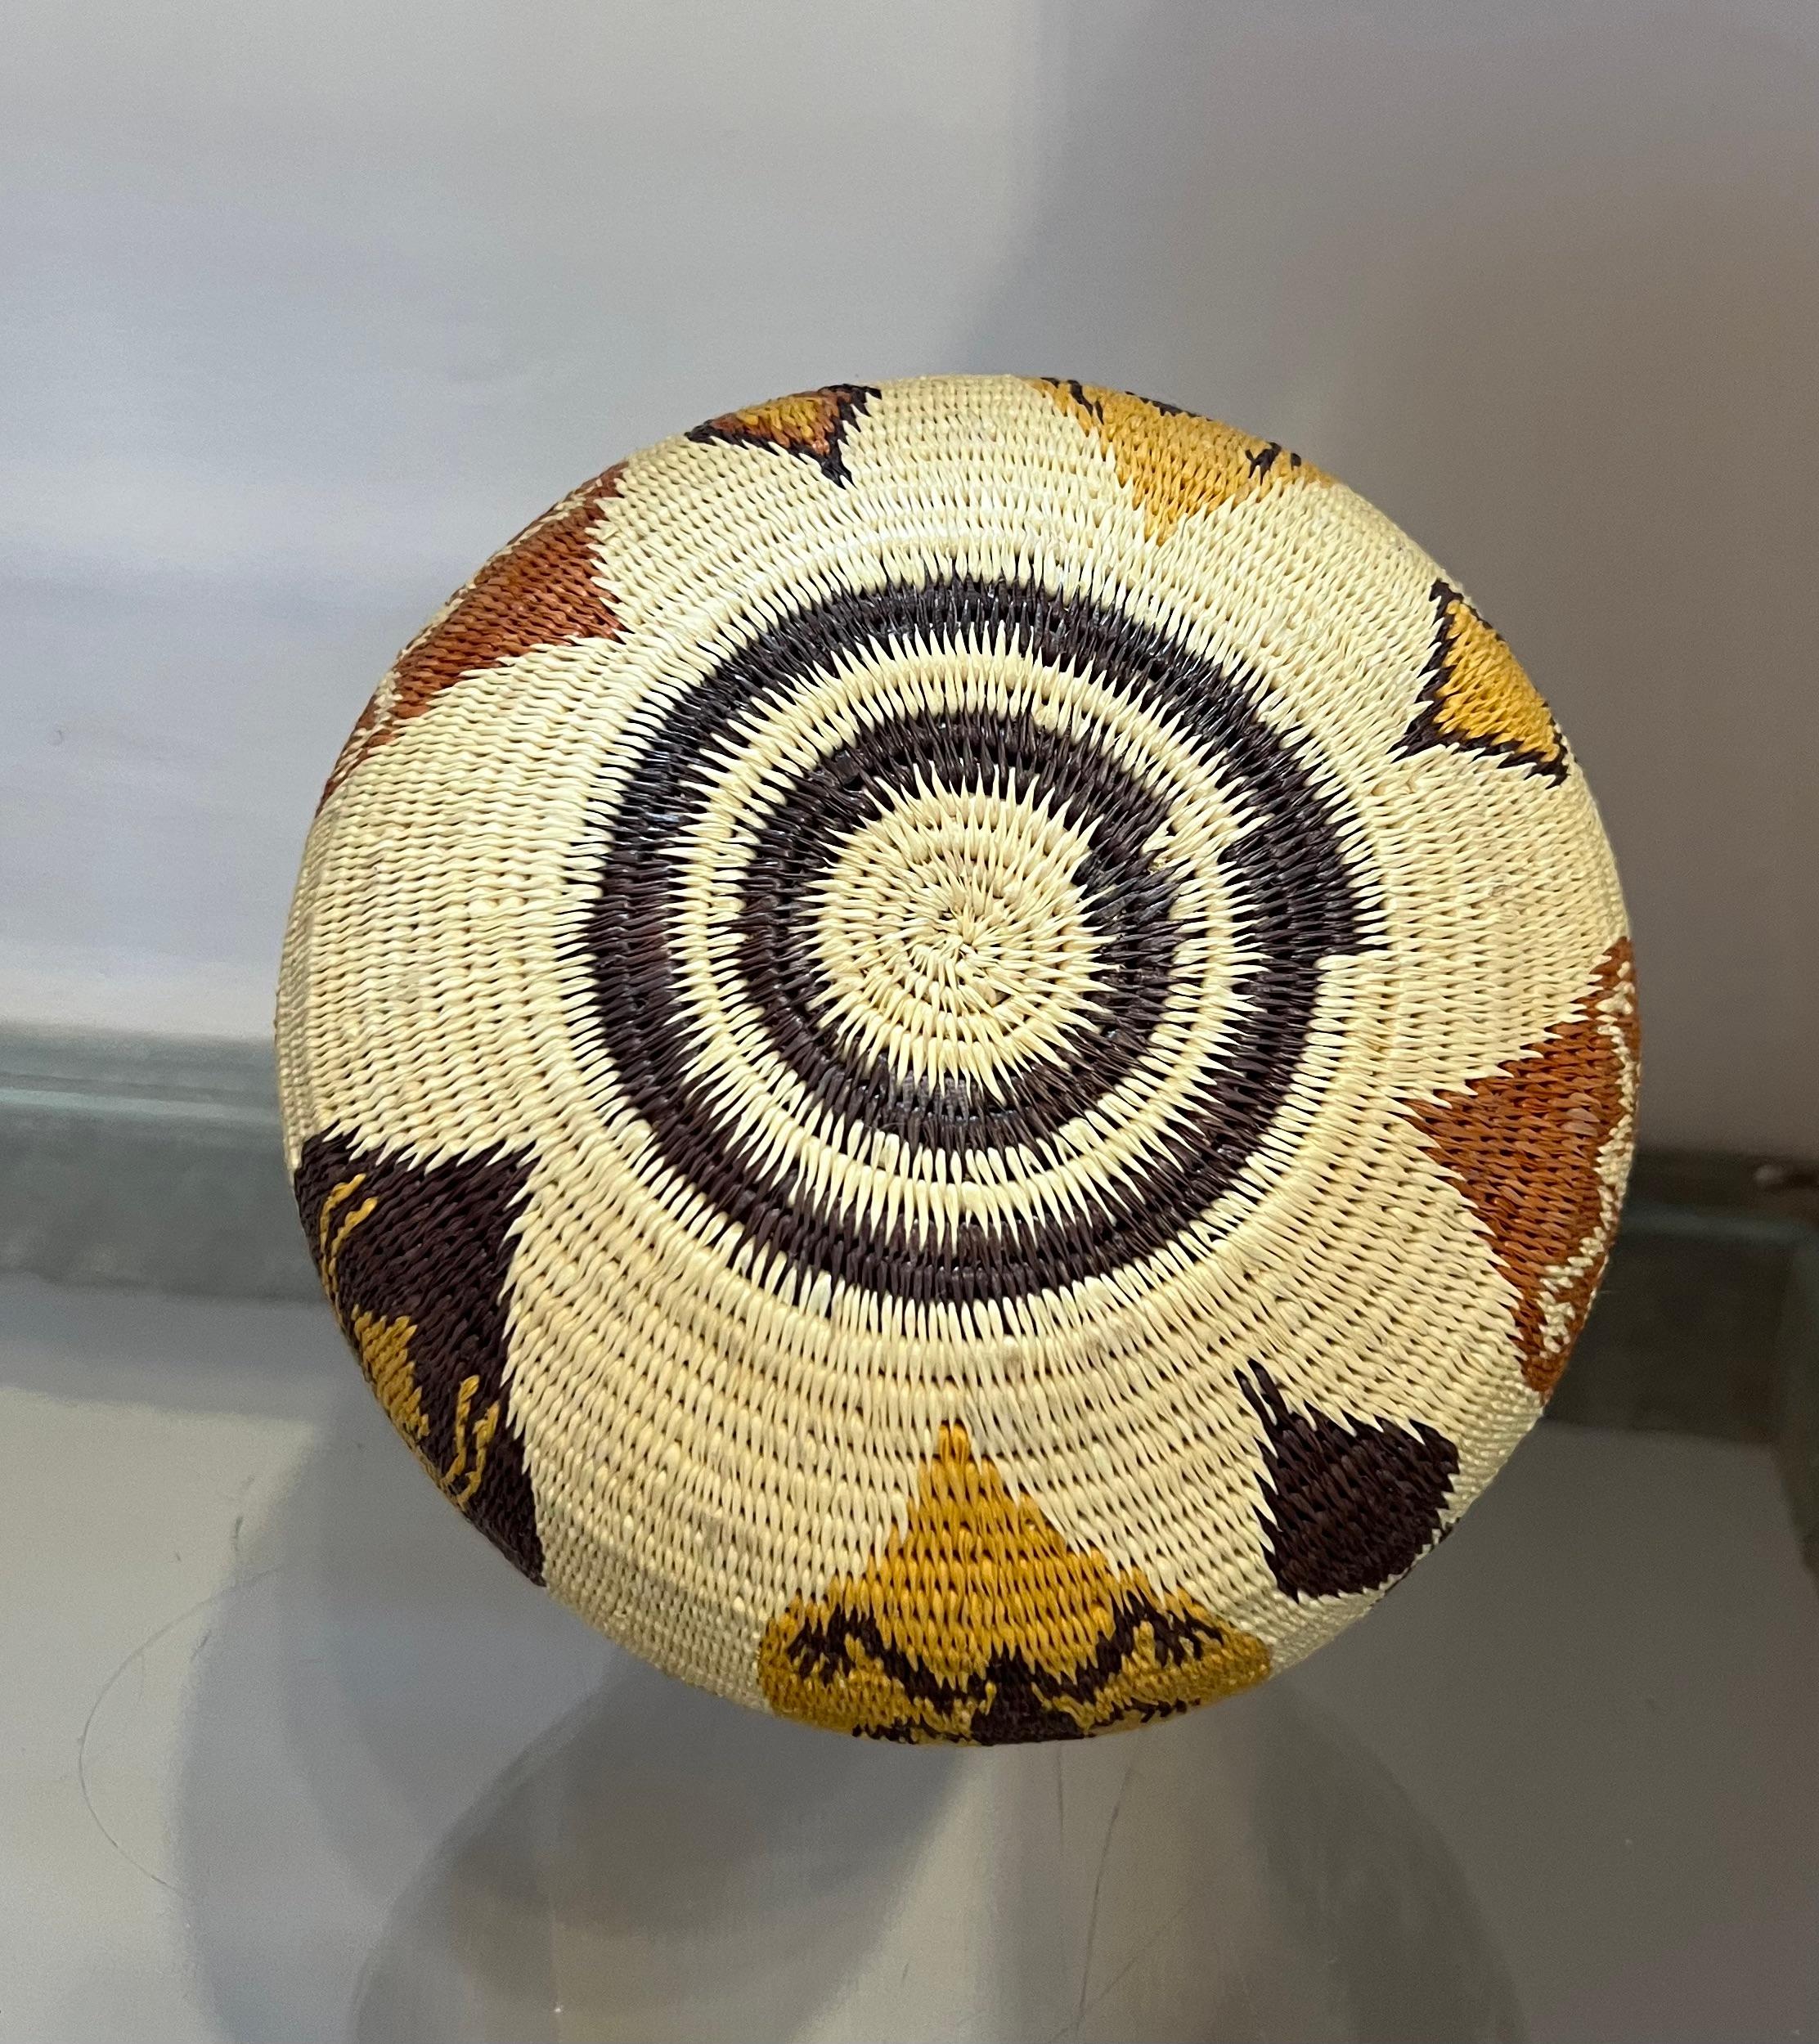 Frog and Spider Basket, Panama Rain Forest, Wounaan Tribe, handwoven, white, red For Sale 2